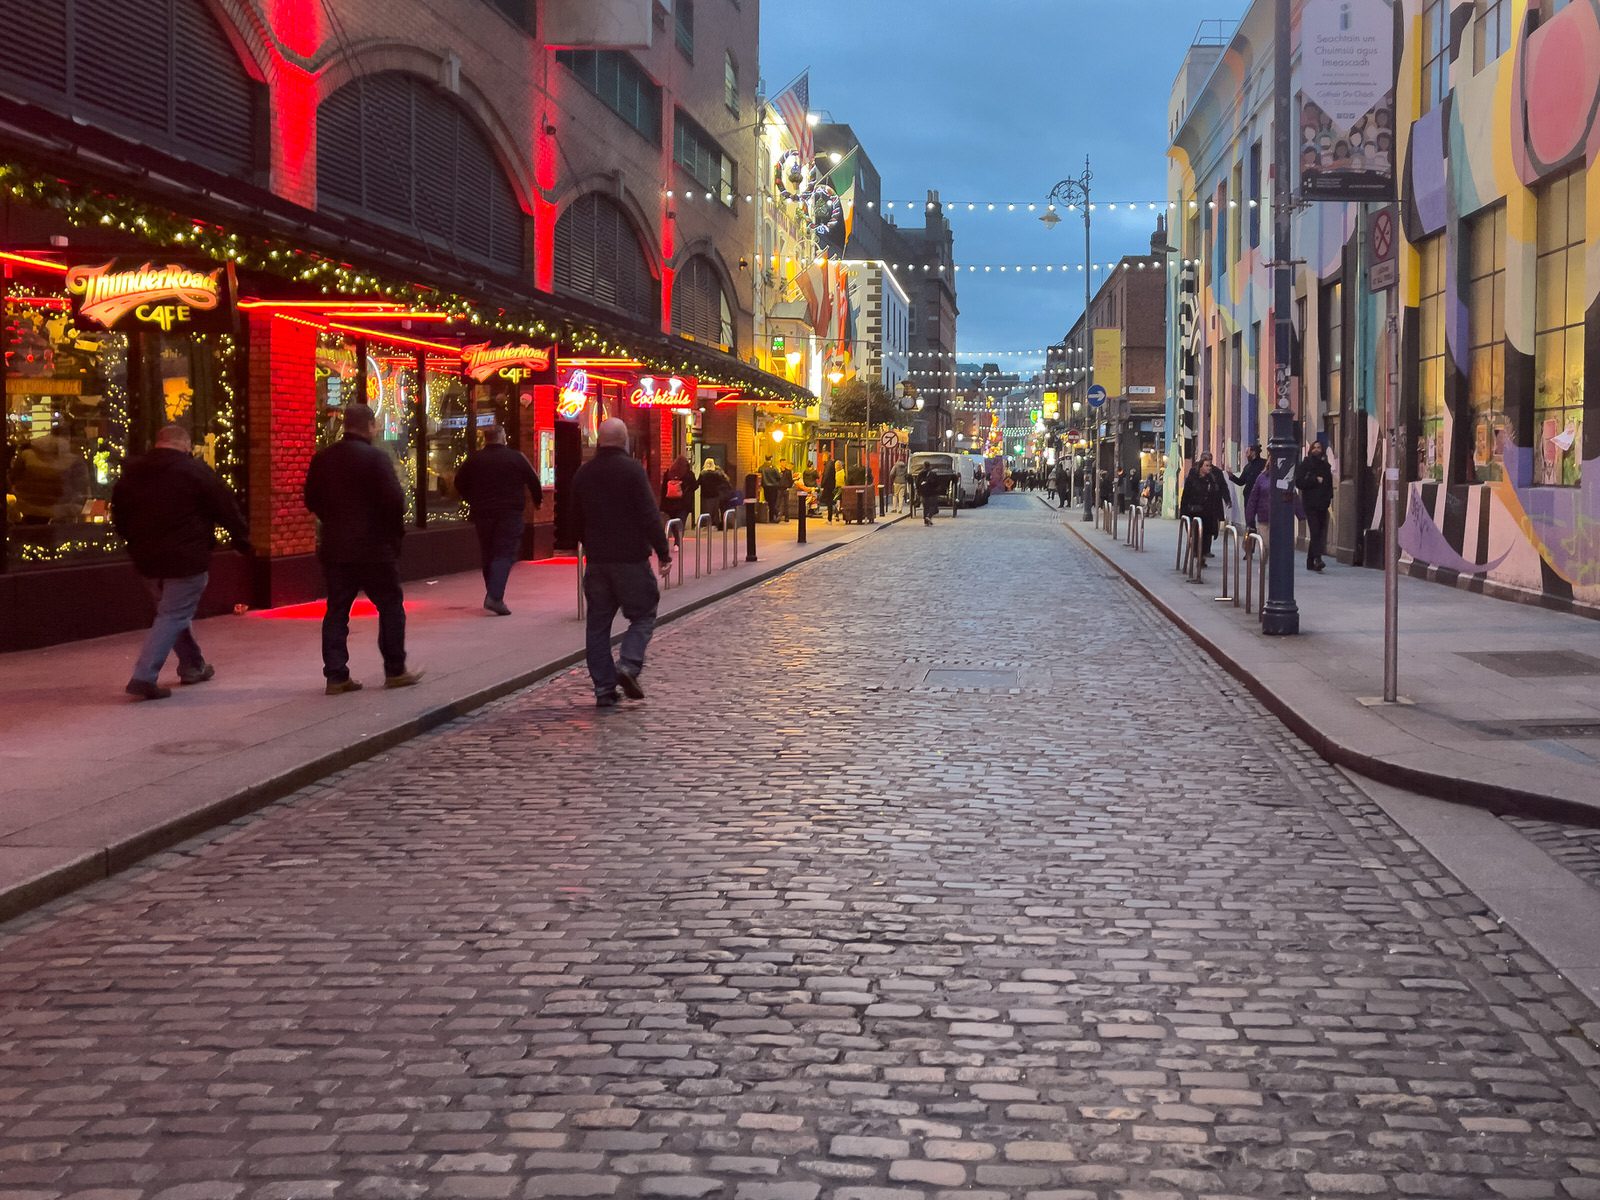 I VISITED TEMPLE BAR TODAY [AS NIGHTFALL WAS APPROACHING]-225331-1